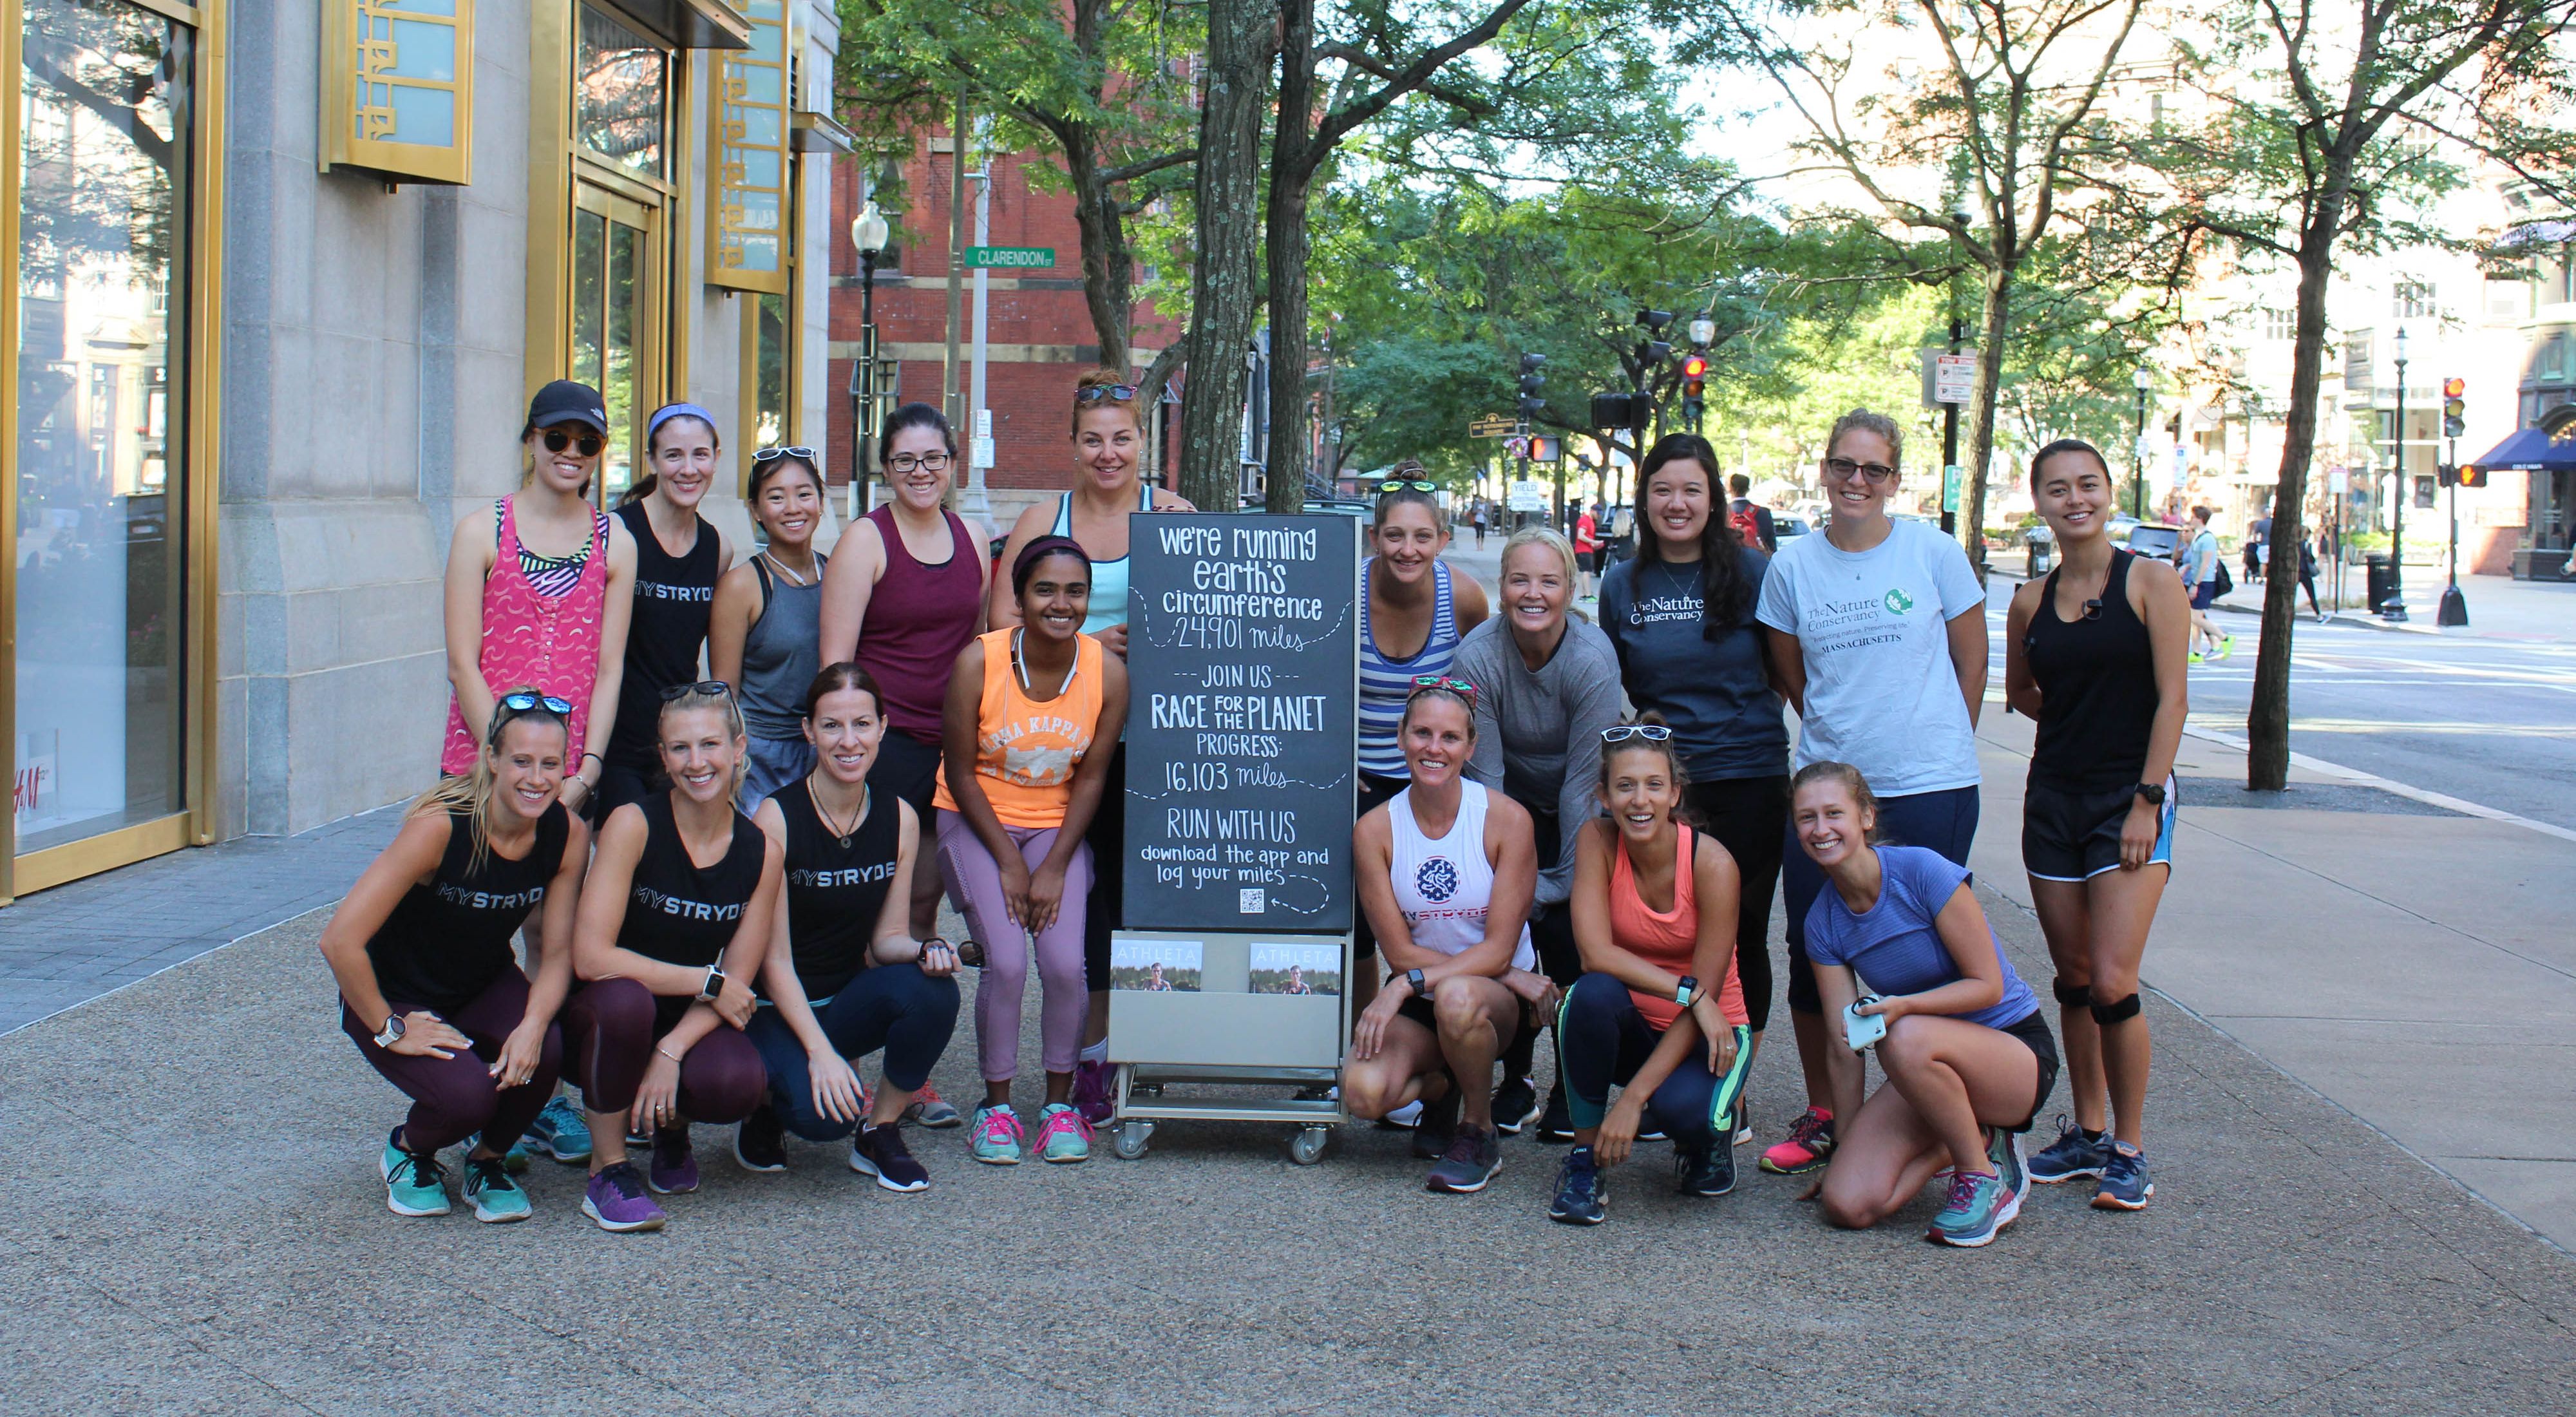 TNC and Athleta teamed up in 2019 to "Race for the Planet," holding events at local stores, like this one in Boston. Trenni Kusnierek is pictured at the center. 